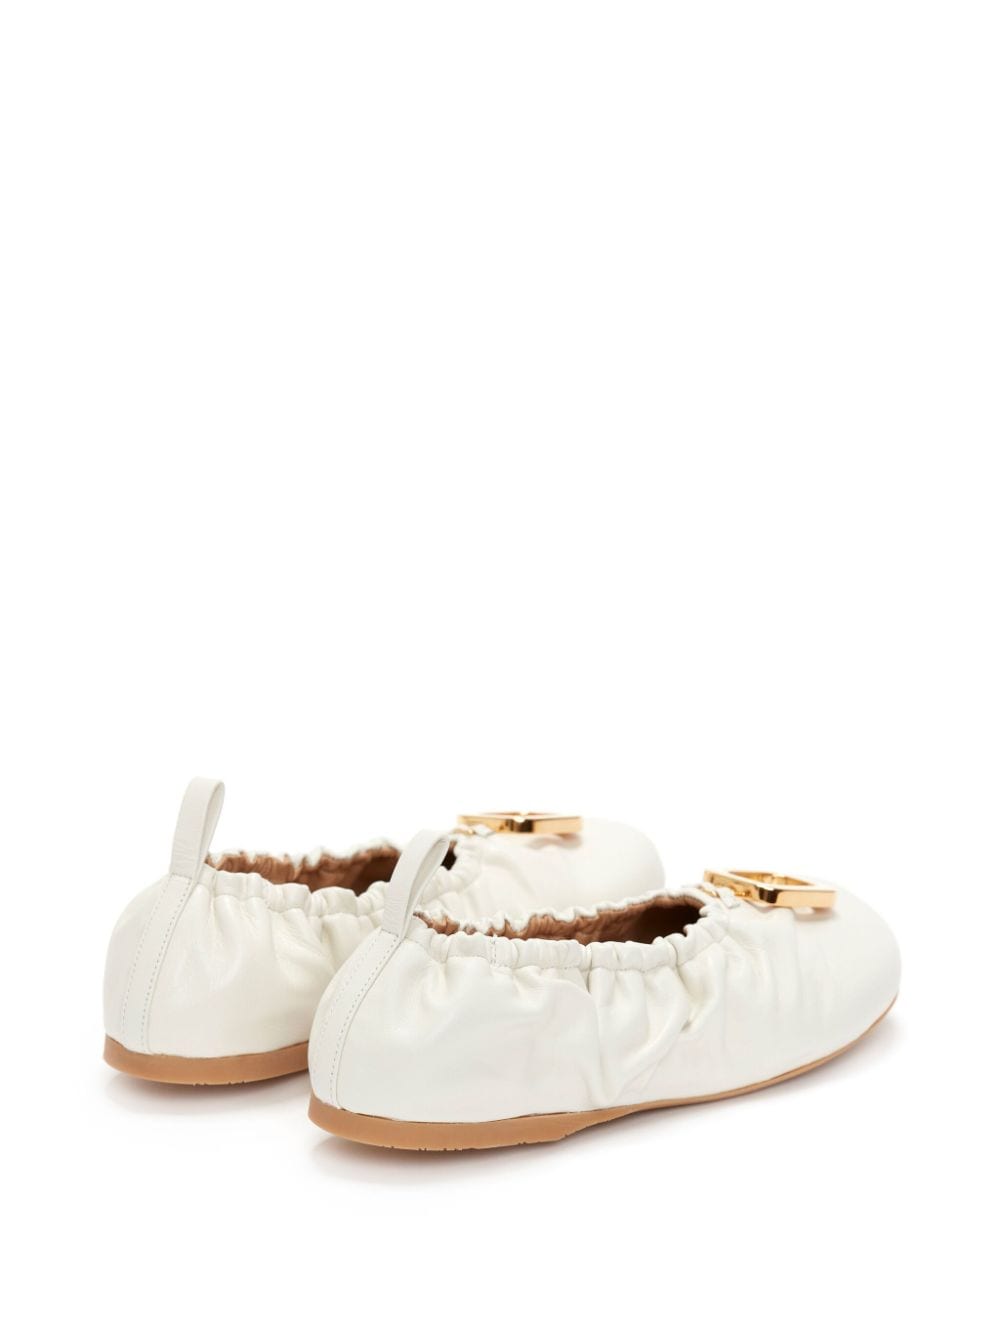 Shop Jw Anderson Jwa Leather Ballerina Shoes In White